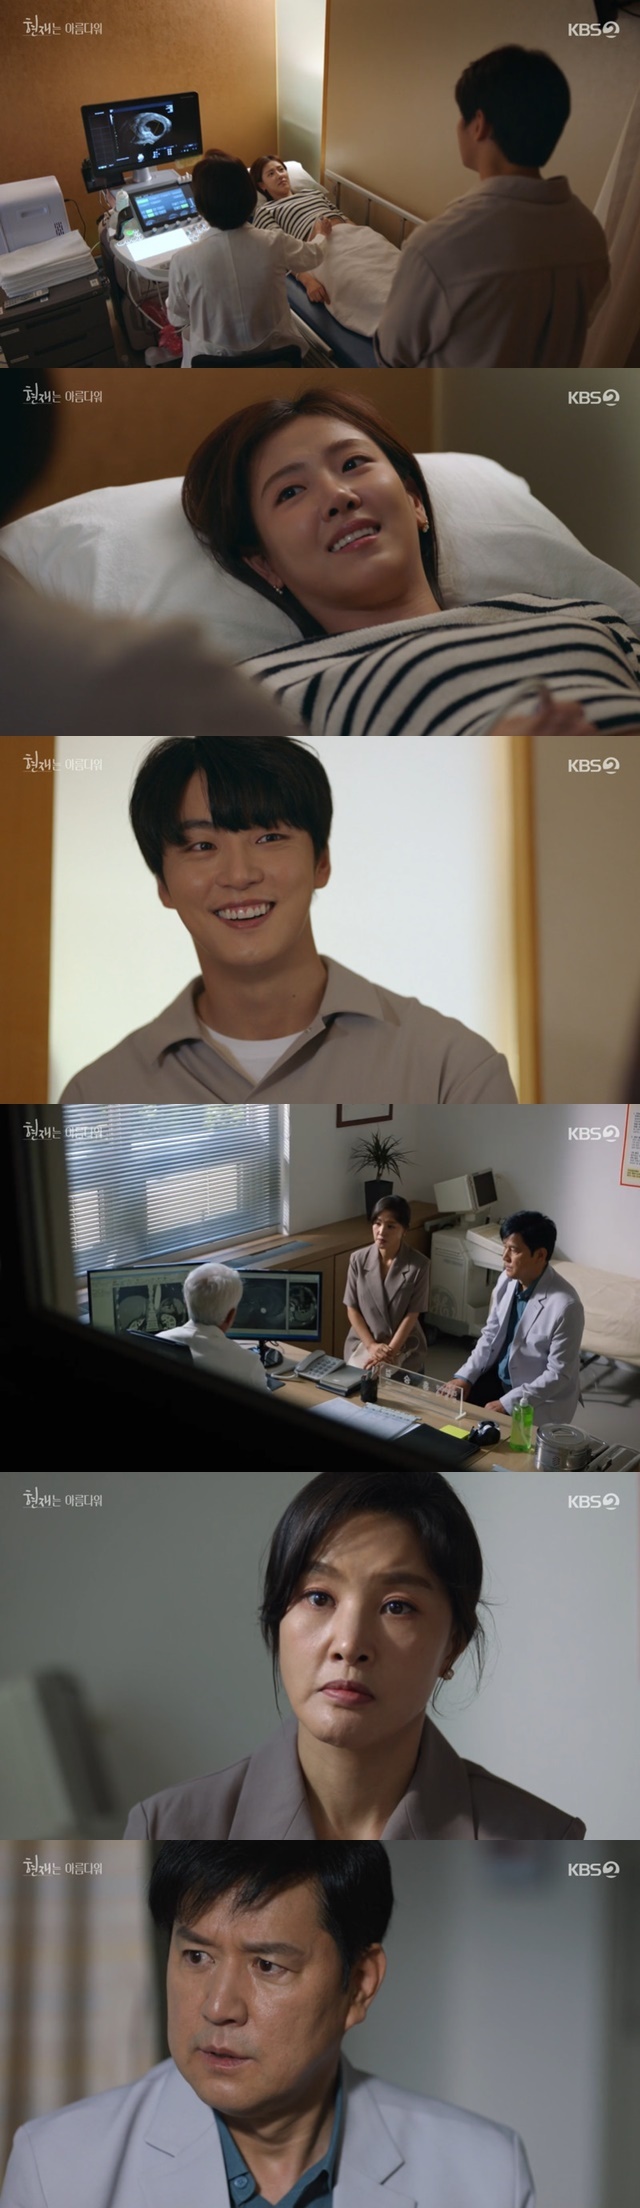 A new conflict has begun when Park Ji-Young was diagnosed with hepatocarcinoma.In the 46th episode of KBS 2TV weekend drama It\s Beautiful Nowplayplayplay by Ha Myung-hee/director Kim Sung-geun), which was broadcast on September 4, Jin Soo-jeong (Park Ji-Young) was diagnosed with hepatocarcinoma.When the couple of profit-making (Oh Min-seok) Shim Hae-joon (Shin Dong-mi) and Lee Hyun-Jae (Yoon Shi-yoon) and Hyun Future (Bae Da-bin) announced the pregnancy side by side, Lee Kyung-chul (Park In-hwan), Lee Min-ho (Park Sang-won), Han Kyung-ae (Kim Hye-ok) ) were all pleased.Profit-making preempted the DIA ring Taemong, saying, When I went to get a side dish, my mother talked about the dream of the DIA ring. Lee Hyun-Jae Hyunfuture became a peach dream.Profit-making did Morning sickness instead of wife Shim Hae-jun.Lee Soo-jae (Seo Bum-joon) took care of Lo Wei (Choi Ye-bin), who was injured instead of himself, and wondered what he did not know when Lo Wei cared about Han Kyung-ae.Han Kyung-ae turned away without telling him that he had met Lo Wei secretly with his son Lee Soo-jae.Lee Soo-jae was also distracted by his brother, Profit-making, and Lee Hyun-Jae, who are all pregnancy and nephews.Han Kyung-ae tried to make a side dish for the pregnancy present Future, and the present Future gave me the apartment password.Jin Soo-jeong (Park Ji-Young) also tried to make a side dish for her daughter, Future, and Jin Soo-jeong and Han Kyung-ae met just at the house of the present Future.They were awkward and had no choice but to return home. Lee Hyun-Jae was embarrassed that Future had given her mother the password.Profit-making could not eat with Morning sickness, but ate only tomatoes and said to her mother, Han Kyung-ae, Thank you Mom.I didnt know that being a pregnancy was so hard. Han said, Im in charge, but he thanked his son for saying, Im in charge.Lee Soo-jae was unable to take Lo Wei to the hospital because of work in the province, and Hyun Jung-hoo (Kim Kang-min) said, So can I take you?I can not give up, he confessed to Lo Wei.Han Kyung-ae went to see Yoo Hye-young (Kim Ye-ryong) and Jang and wondered about the relationship between the two who witnessed Lo Wei and Hyun Jung-hoo.Jin Soo-jeong took a health checkup with her husband Hyun Jin-heon (Mr. Byun Woo-min) and took her father Lee Kyung-chul and aunt Lee Kyung-soon (Mr. Sun Woo-yong) home on the way to take her mother-in-law Yoon Jeong-ja (Mr. Ban Hyo-jeong).Yoon Jeong-ja complained, I think I have been in the car for too long.Han Kyung-ae doubted his son Lee Soo-jae about the triangle relationship with Lo Wei and Hyun Jung-hoo.I saw you and Jung-hoo at Mart today. Lee said, I think they went to the hospital together and then Mart. Jung-hoo likes Yuna. You went to Yuna Bong-hoo.Yuna likes you after school, too? said Han Kyung-ae, Is Yuna so easy to forget about you?